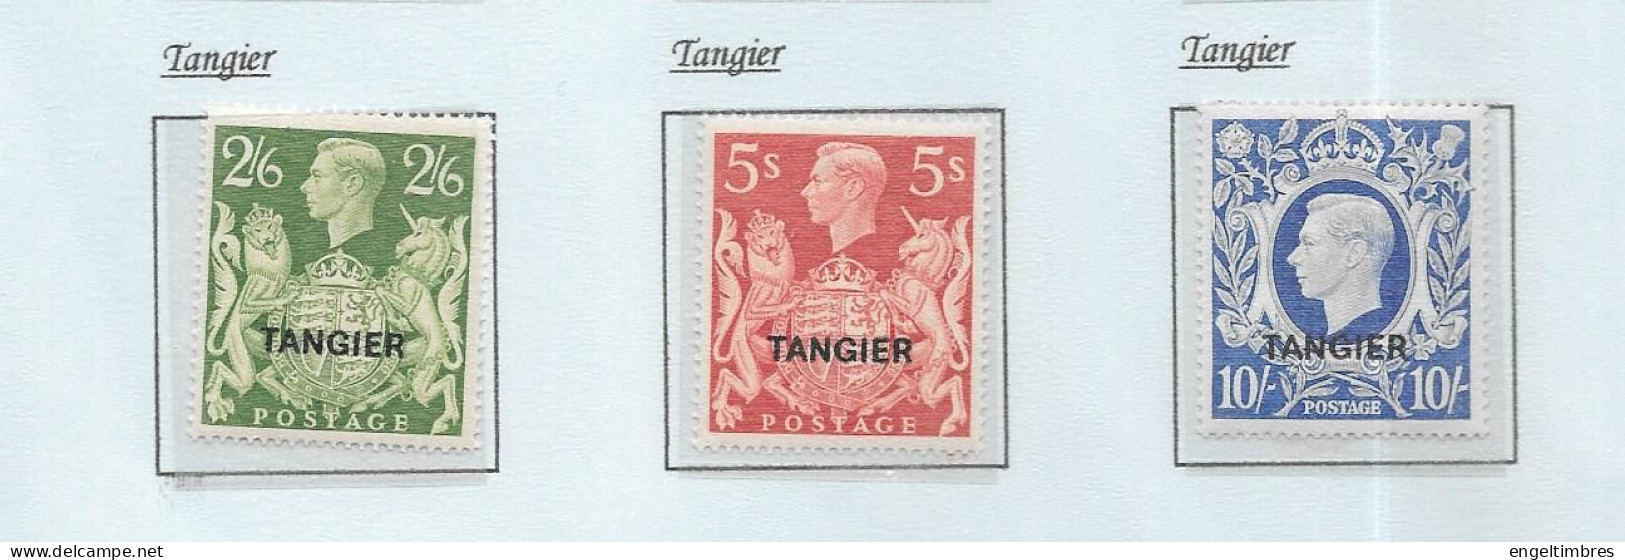 GB George Vl -   "ARMS"  TANGIER  -  High Values (3)    U/M  See Scans - Neufs